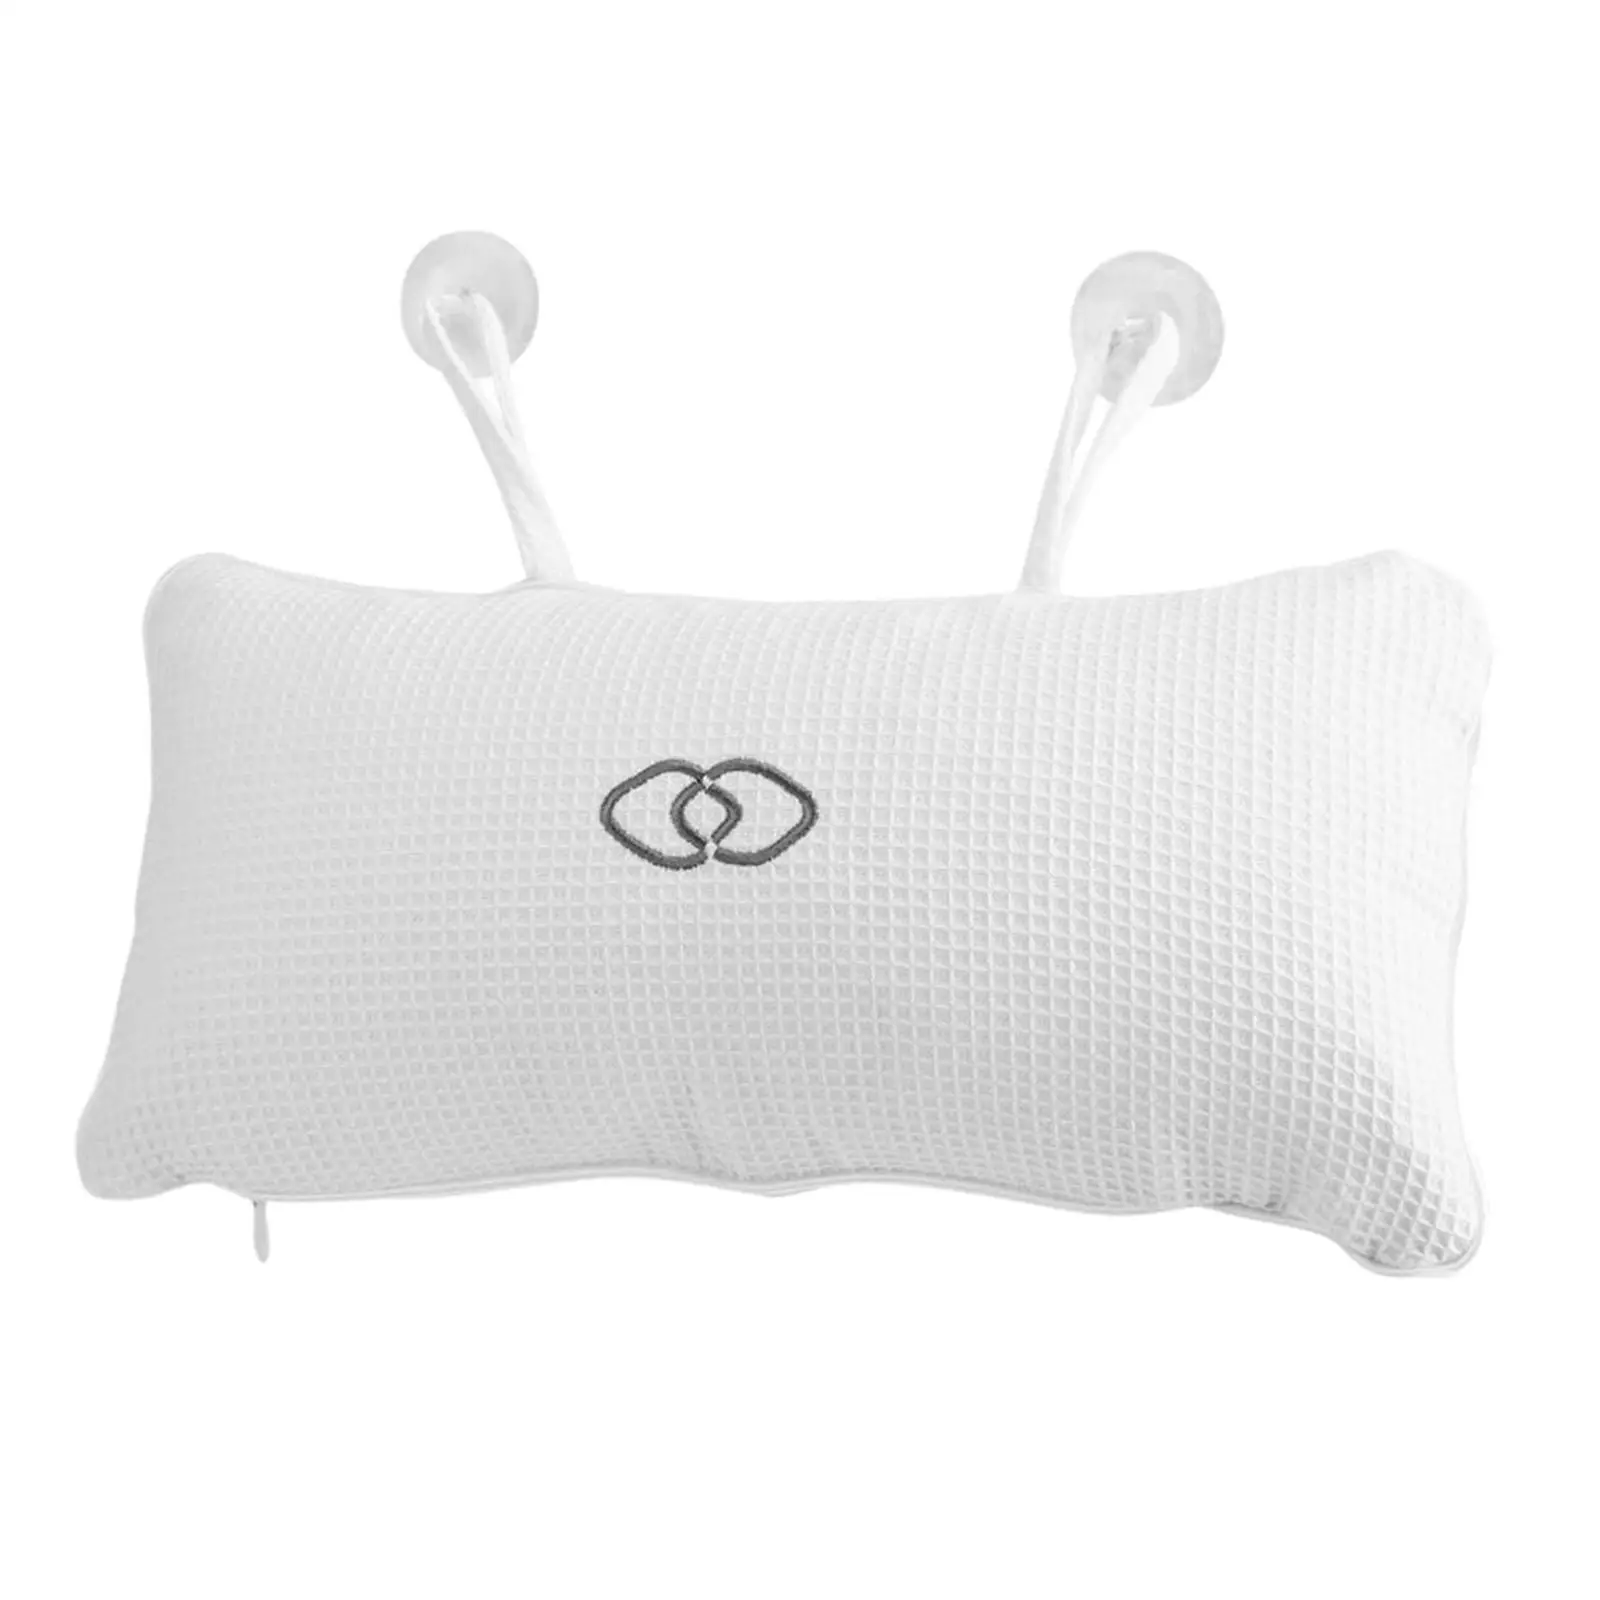  Pillow  in Luxury Fast Drying Bathtub  for Head, Neck and  & Tub Headrest Support Cushion